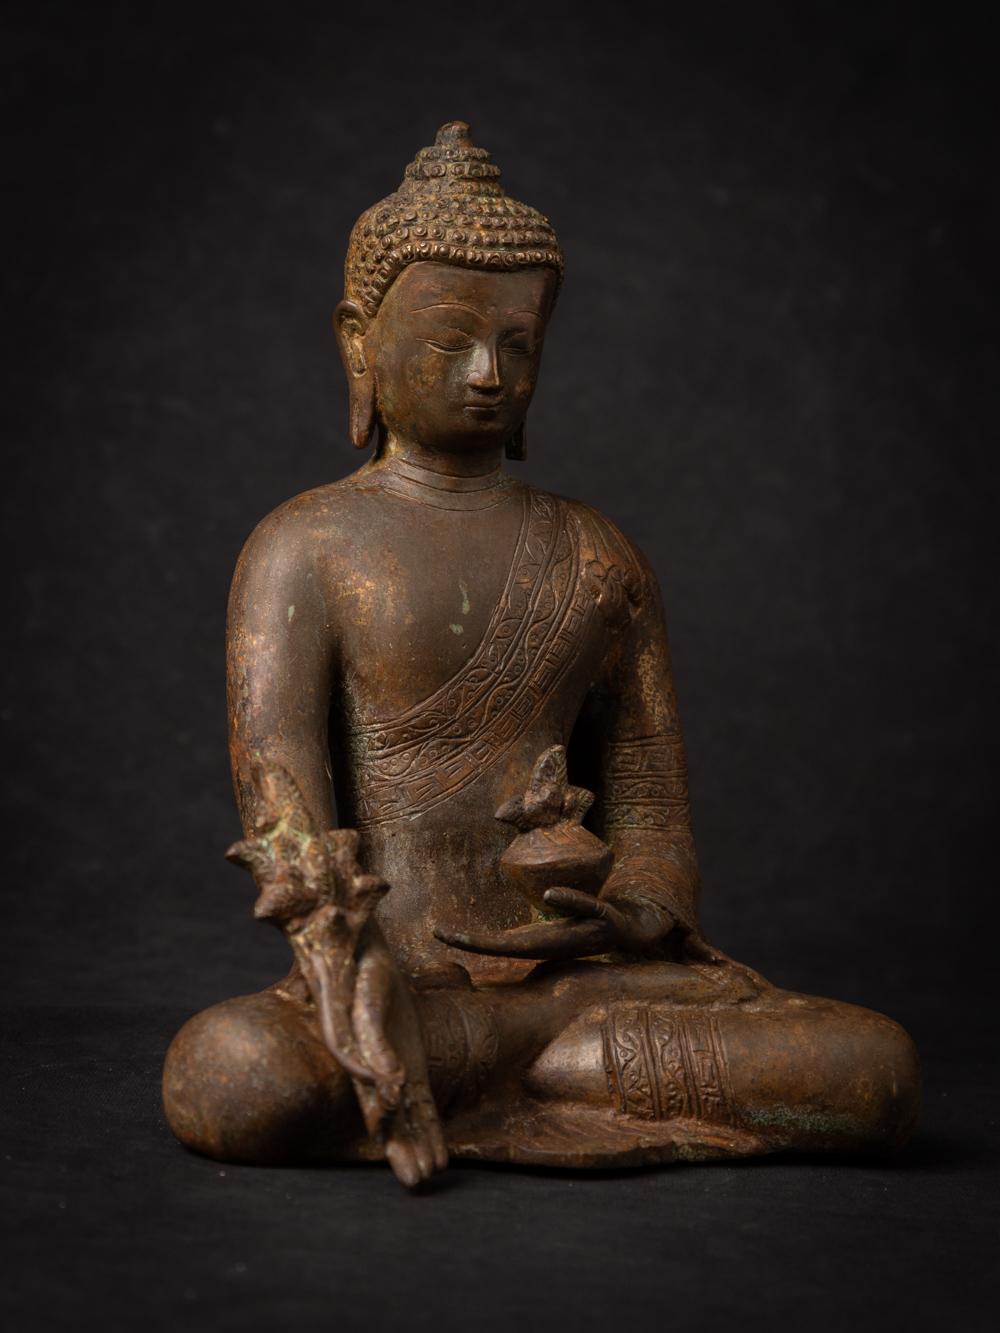 Bronze Nepali Medicine Buddha statue
Material : bronze
21,8 cm high
16,8 cm wide and 13 cm deep
Recently made - not antique
Weight: 2,74 kgs
Originating from Nepal
Nr: 3649-12

Nepali Medicine Buddha statue is very popular among all the Buddha